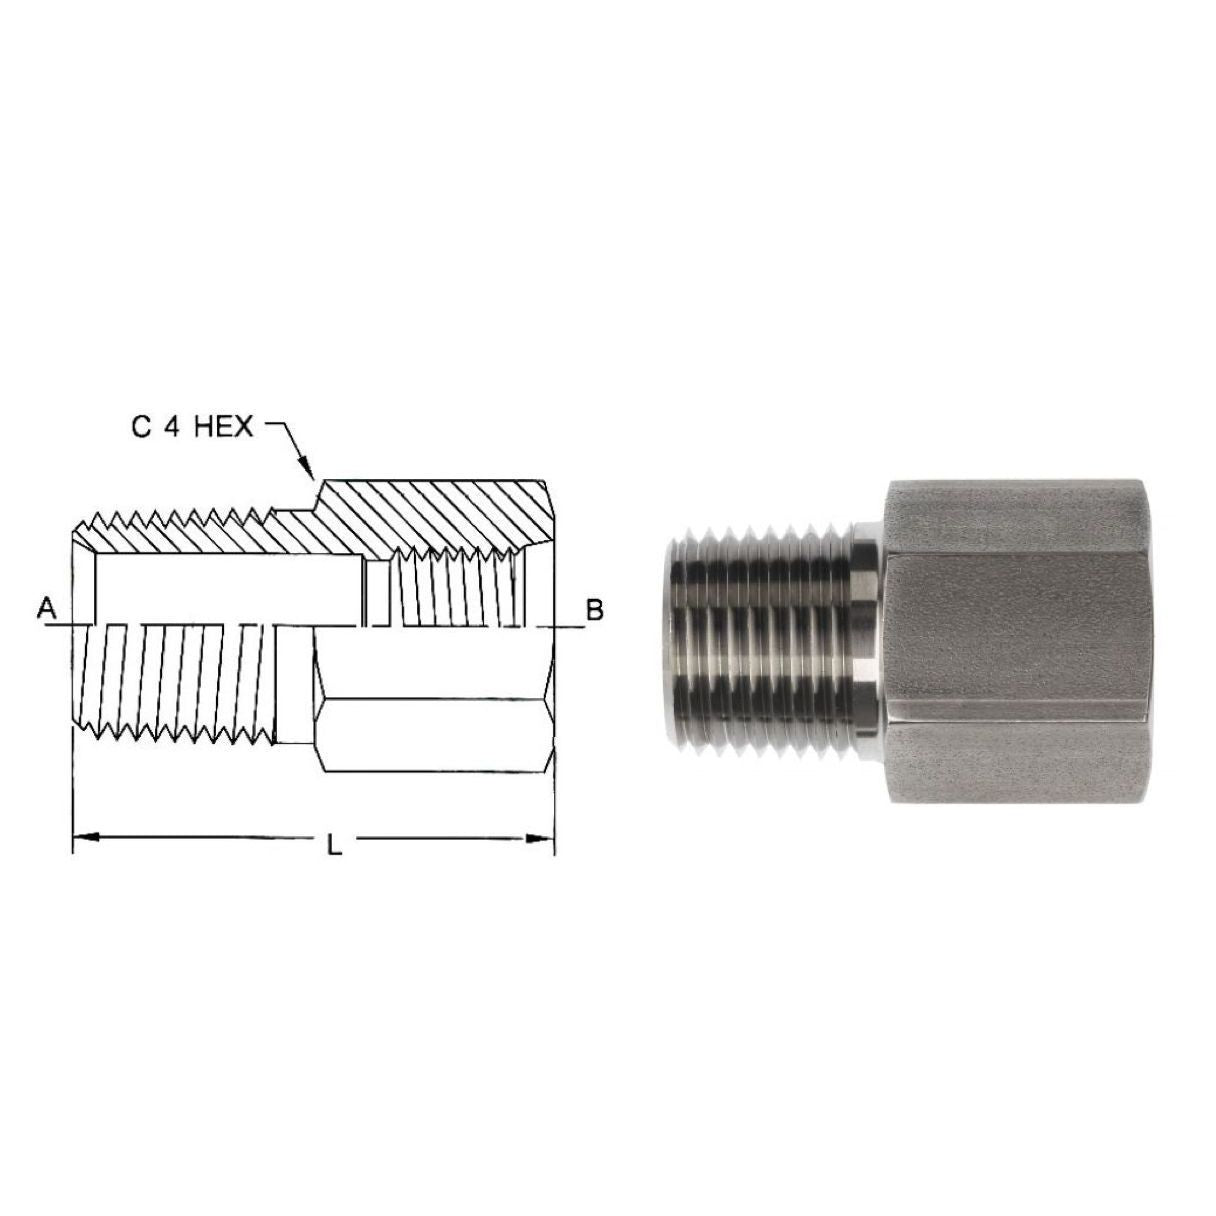 6404-06-08 : OneHydraulics Adapter, Straight, 0.375 (3/8") Female ORB x 0.5 (1/2") Male, Steel, 6000psi